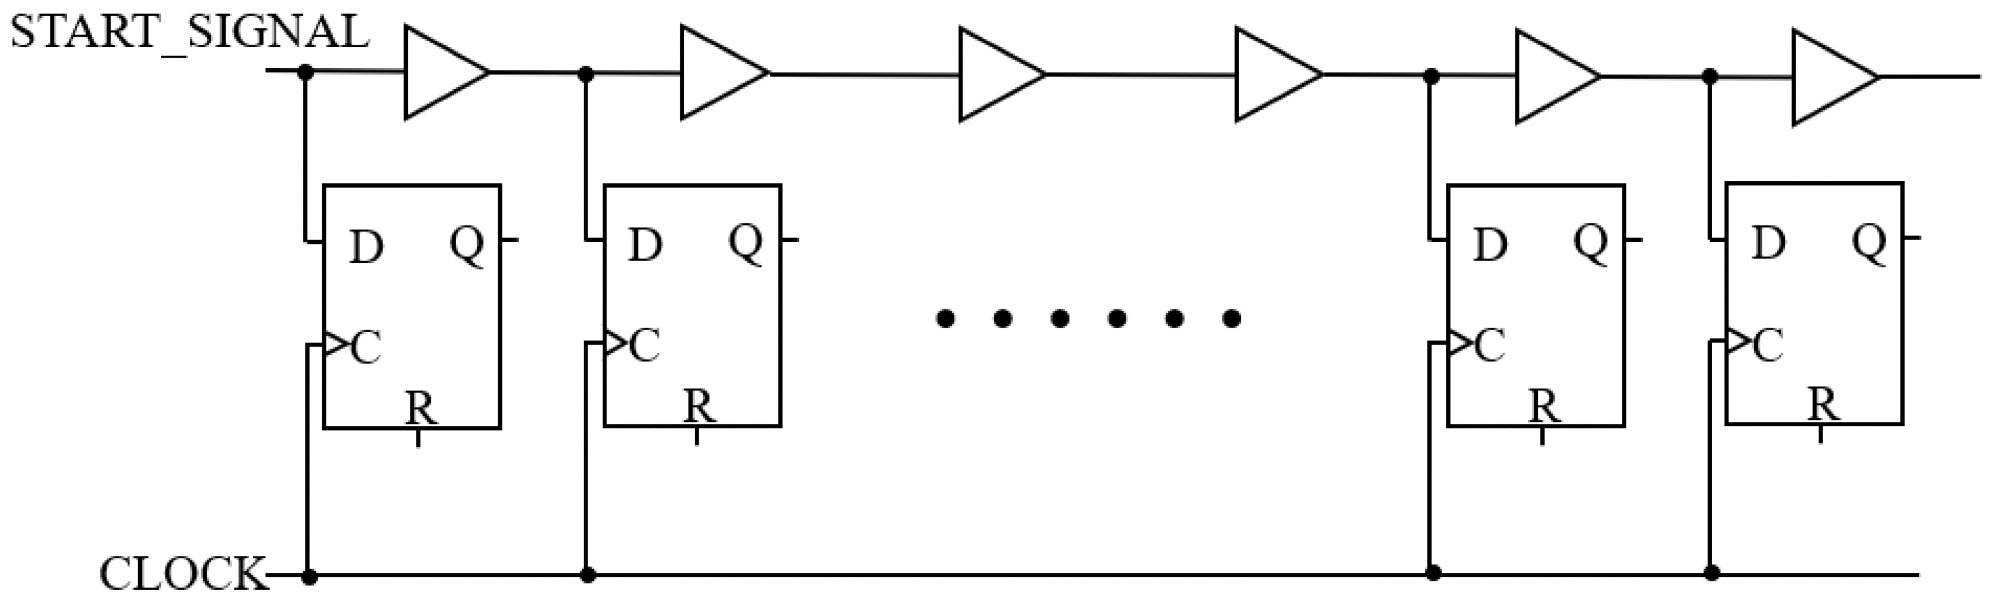 The architecture of the delay line.